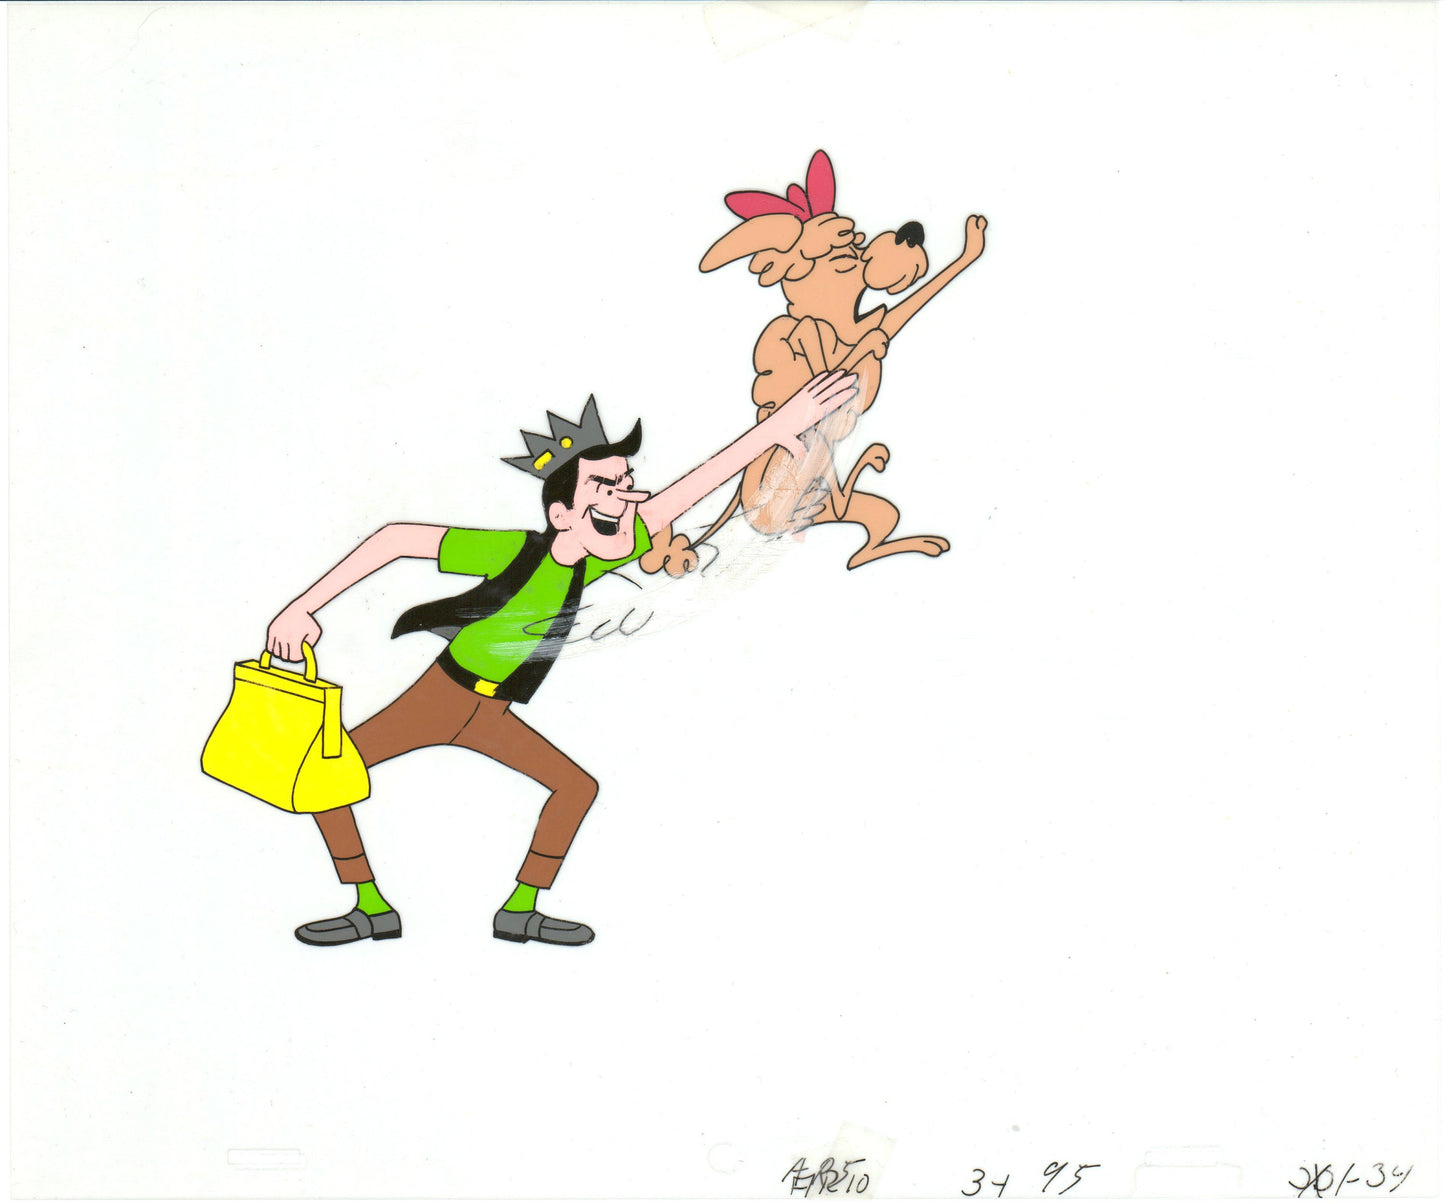 Archie Production Animation Art Cel Setup from Filmation 1968-1969 b2073